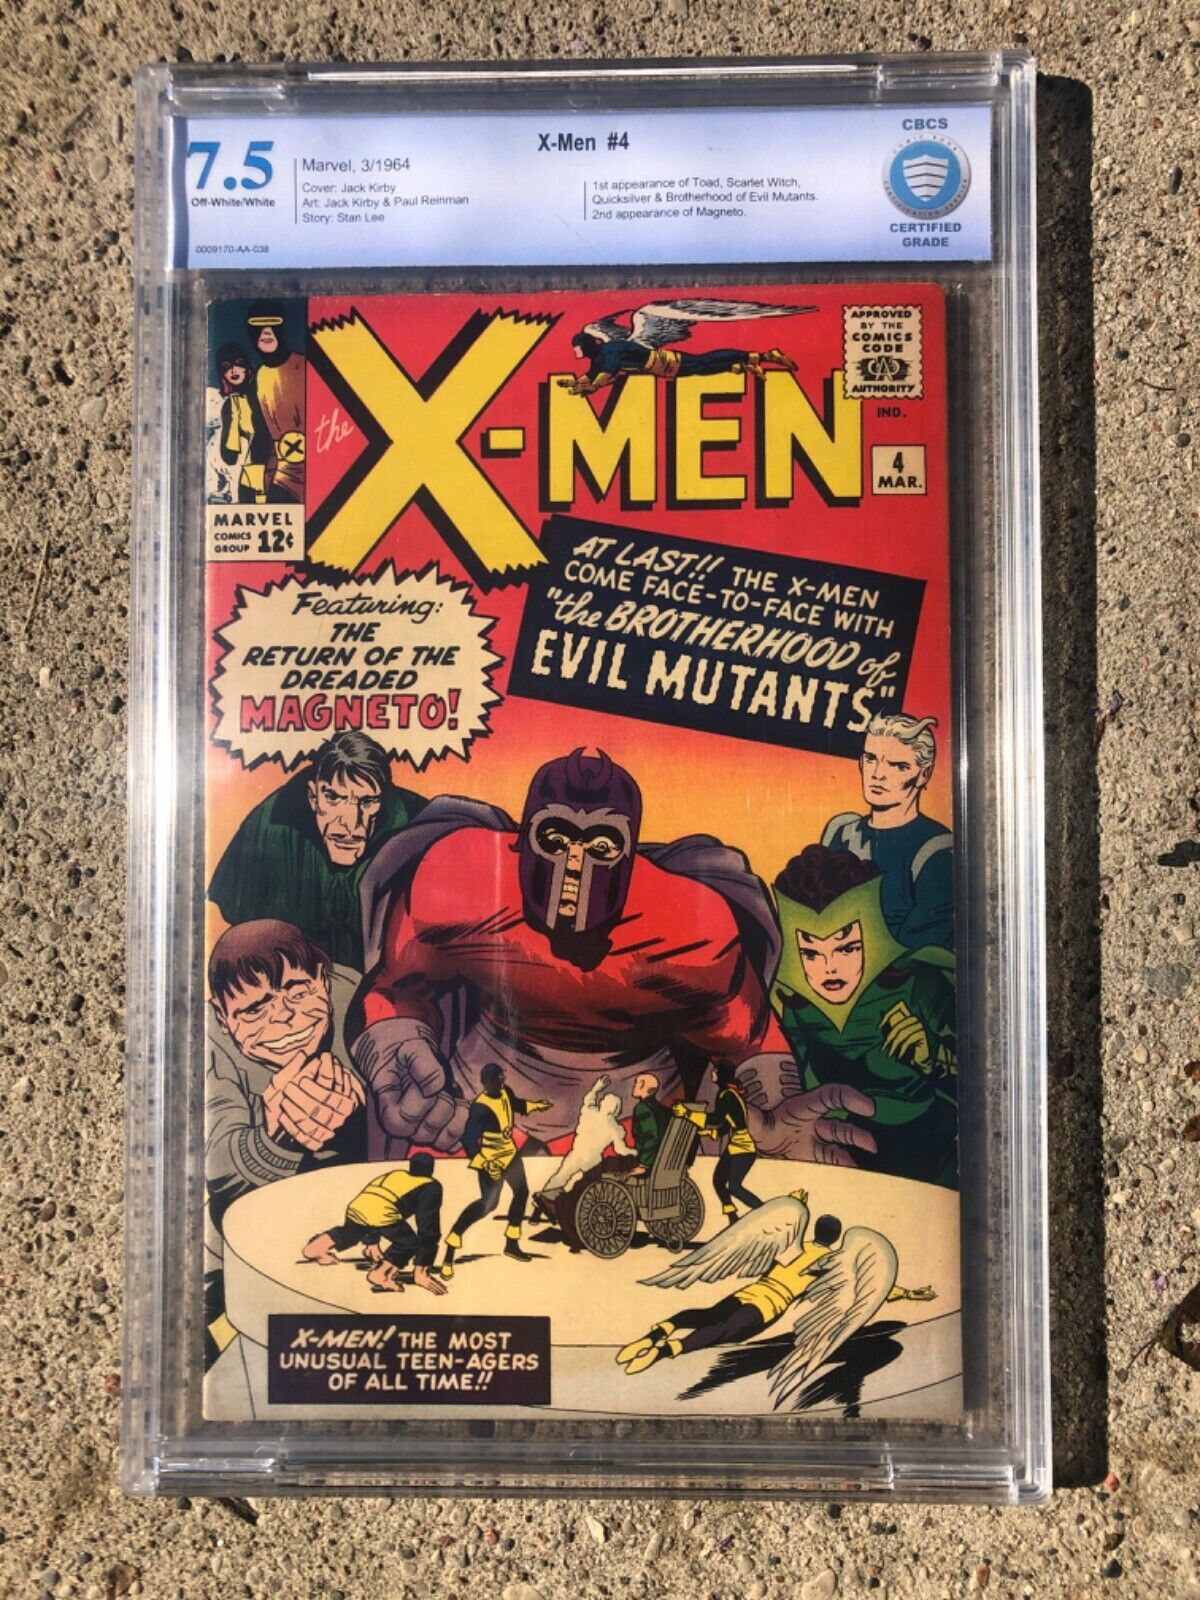 XMEN 4 CBCS 75 OWW PAGES LOOKS 80 OR BETTER CGC FIRST SCARLET WITCH